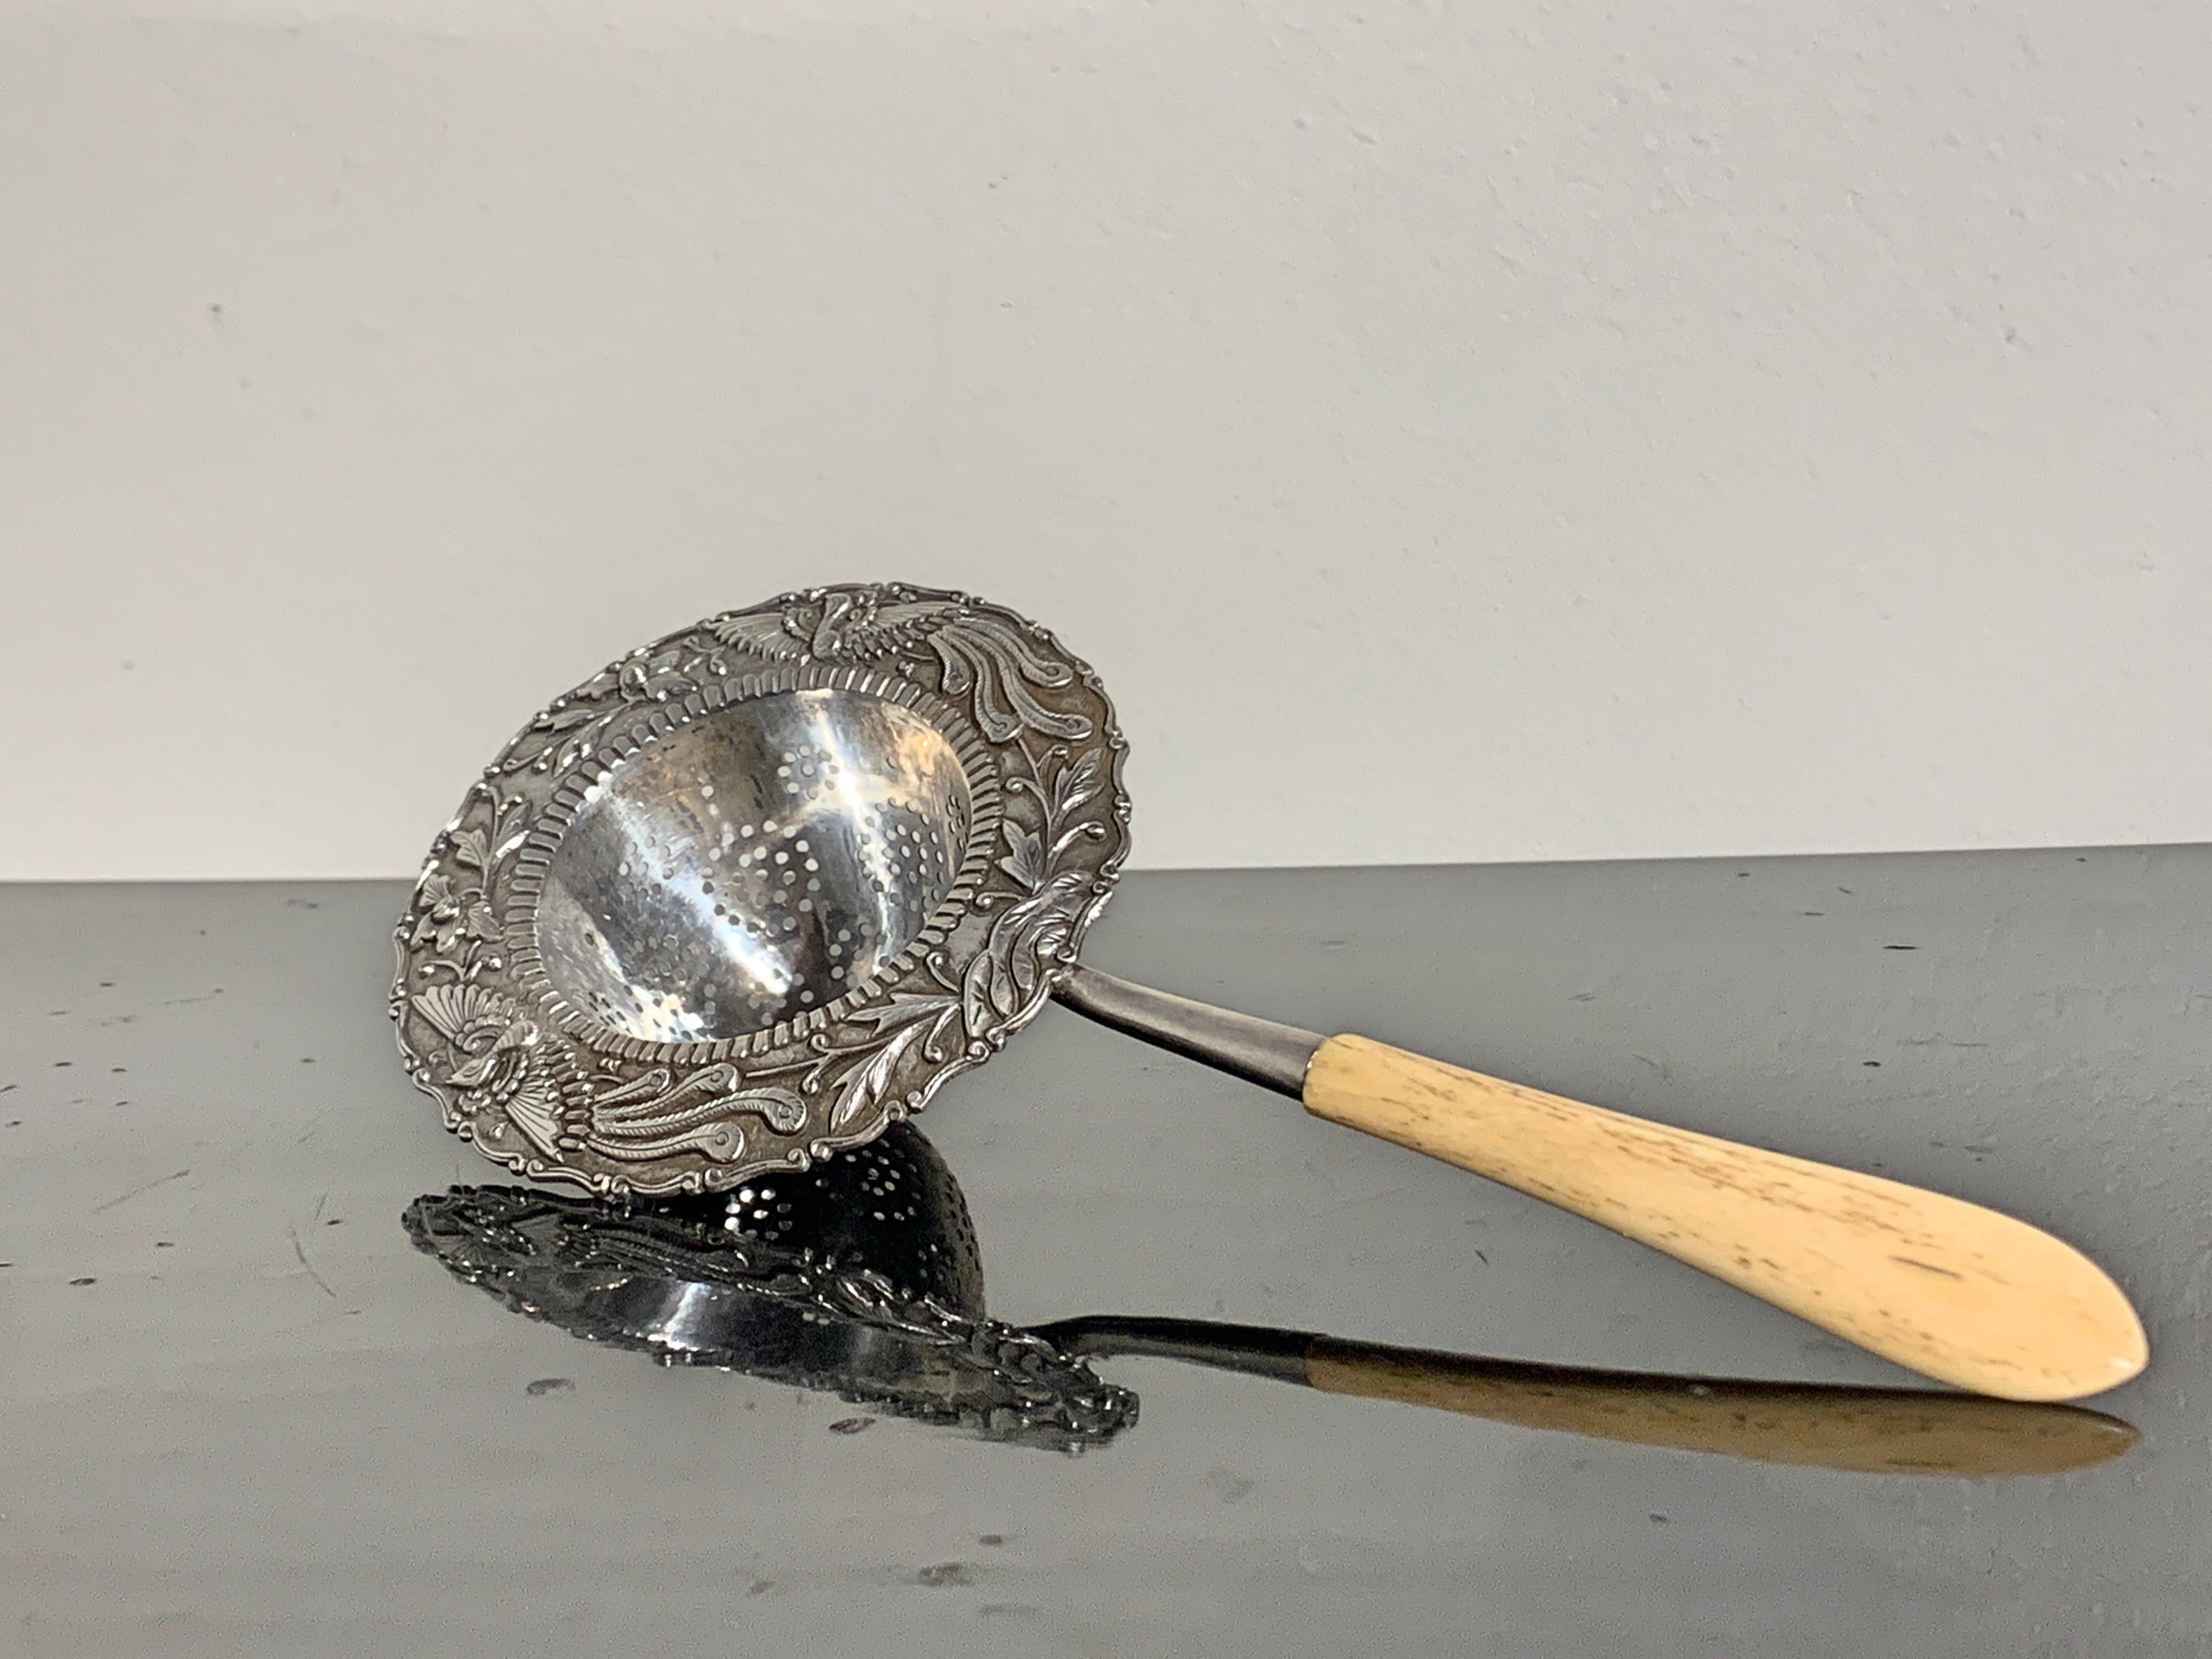 A fine Chinese export silver tea strainer for the Southeast Asian market, featuring a bone handle, late 19th century, China.

The tea strainer crafted of repoussé silver with a design of phoenixes in flight and holding flowering branches. The